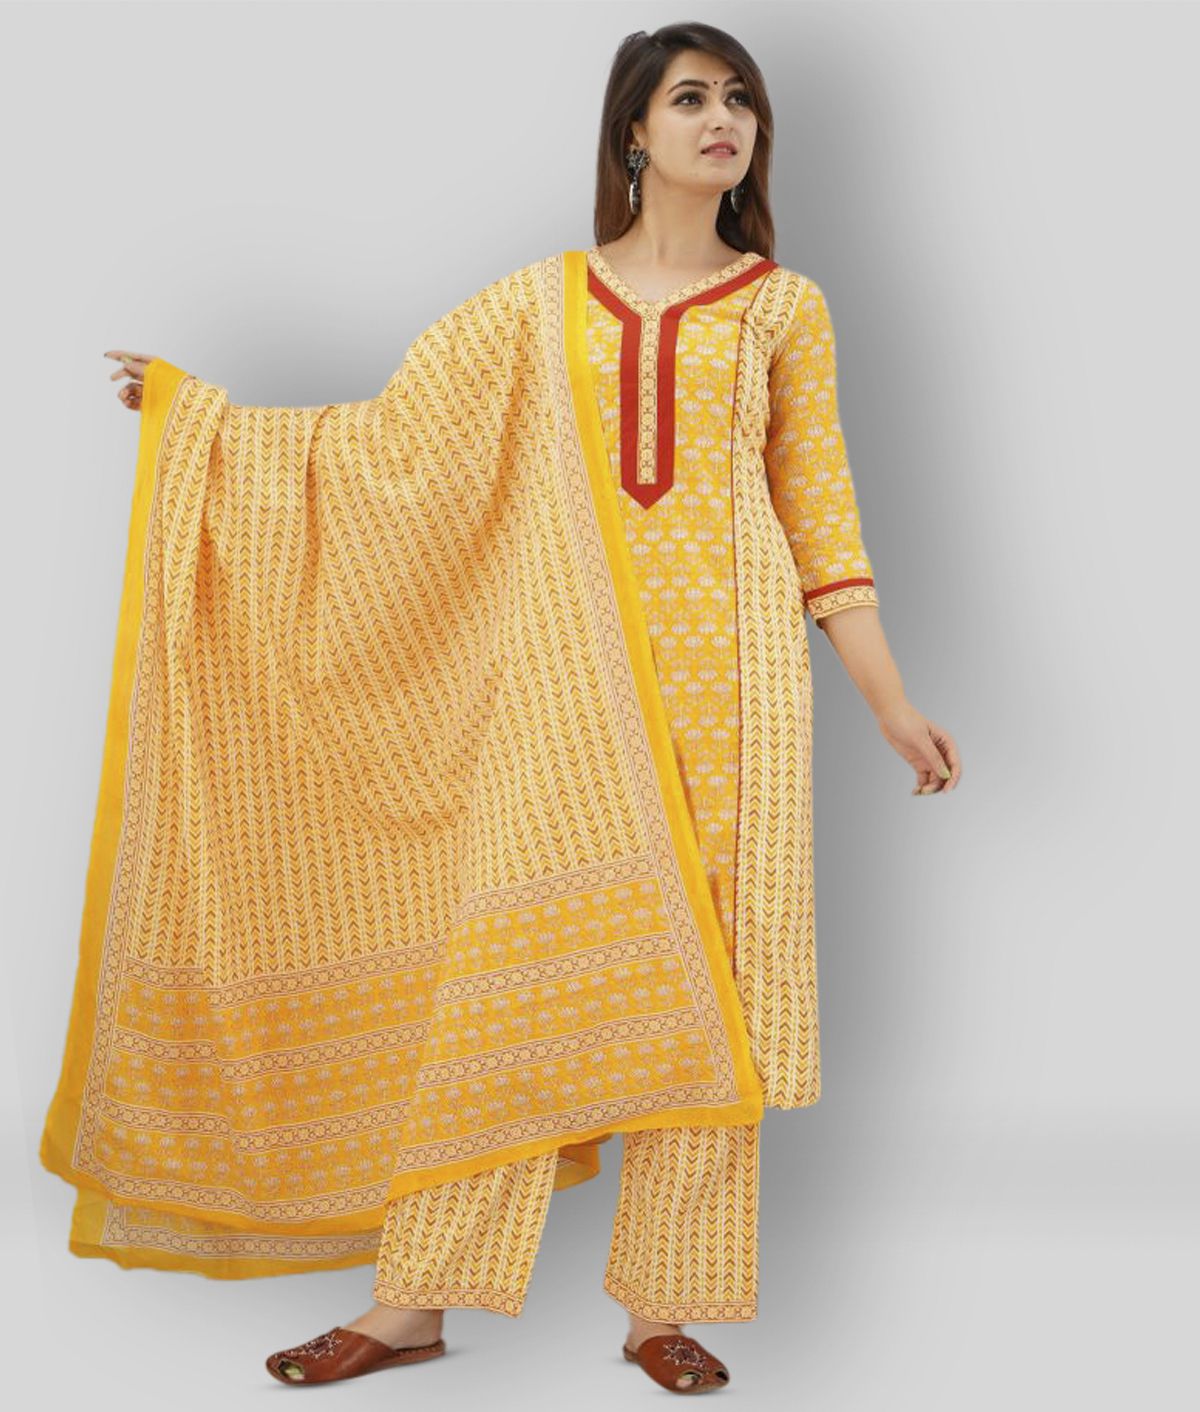     			SVARCHI - Yellow Straight Cotton Women's Stitched Salwar Suit ( Pack of 1 )